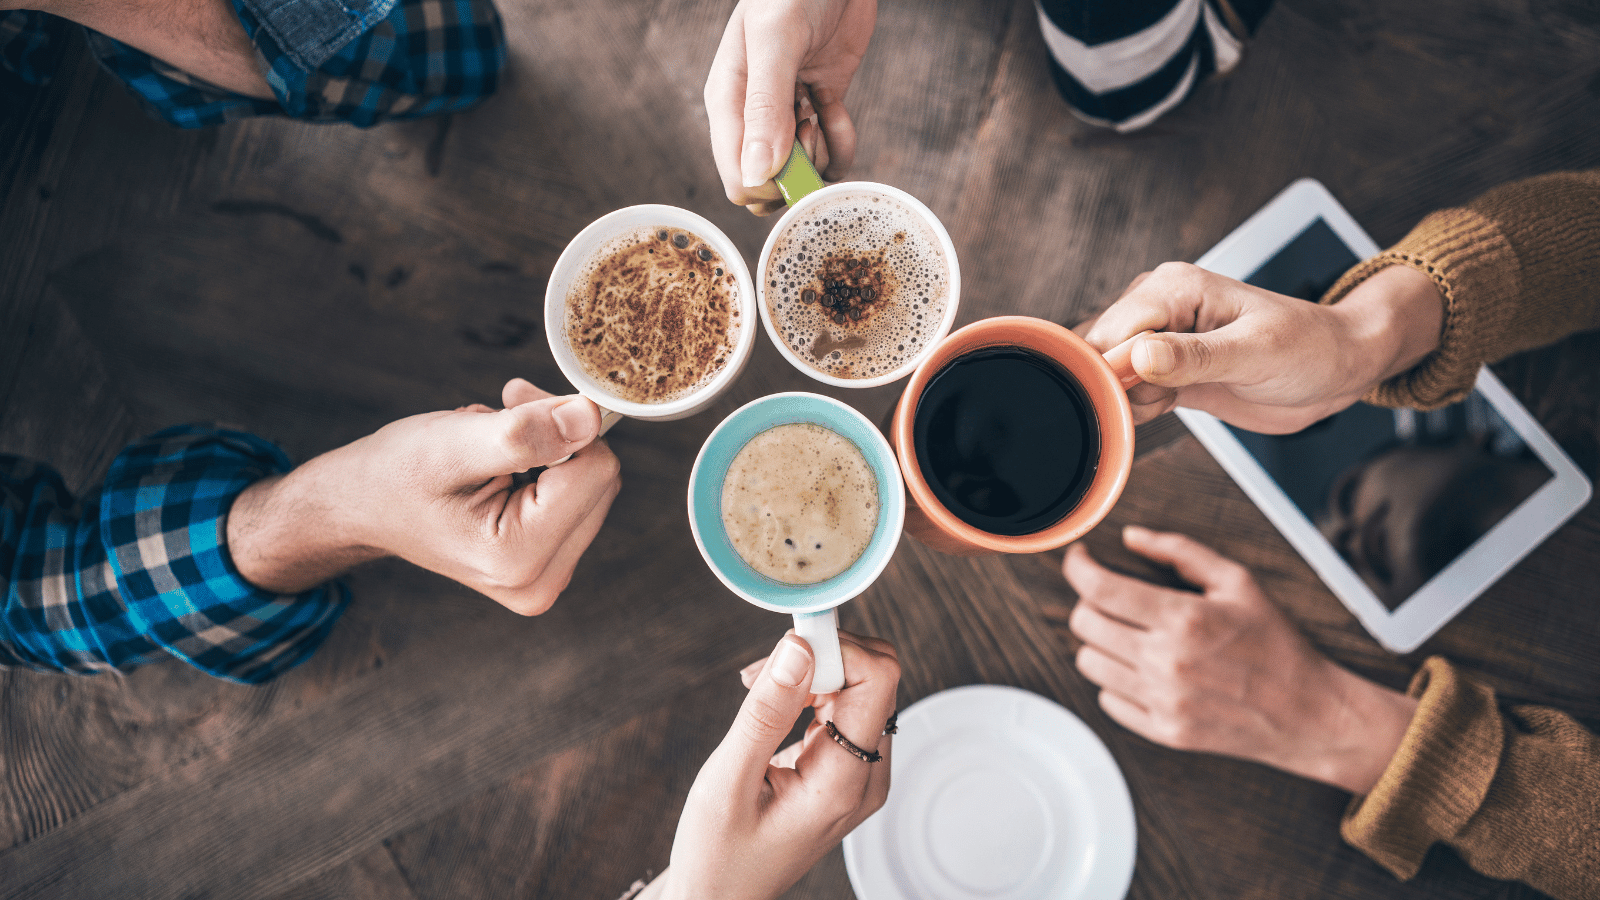 Four hands holding mugs of coffee and touching them together